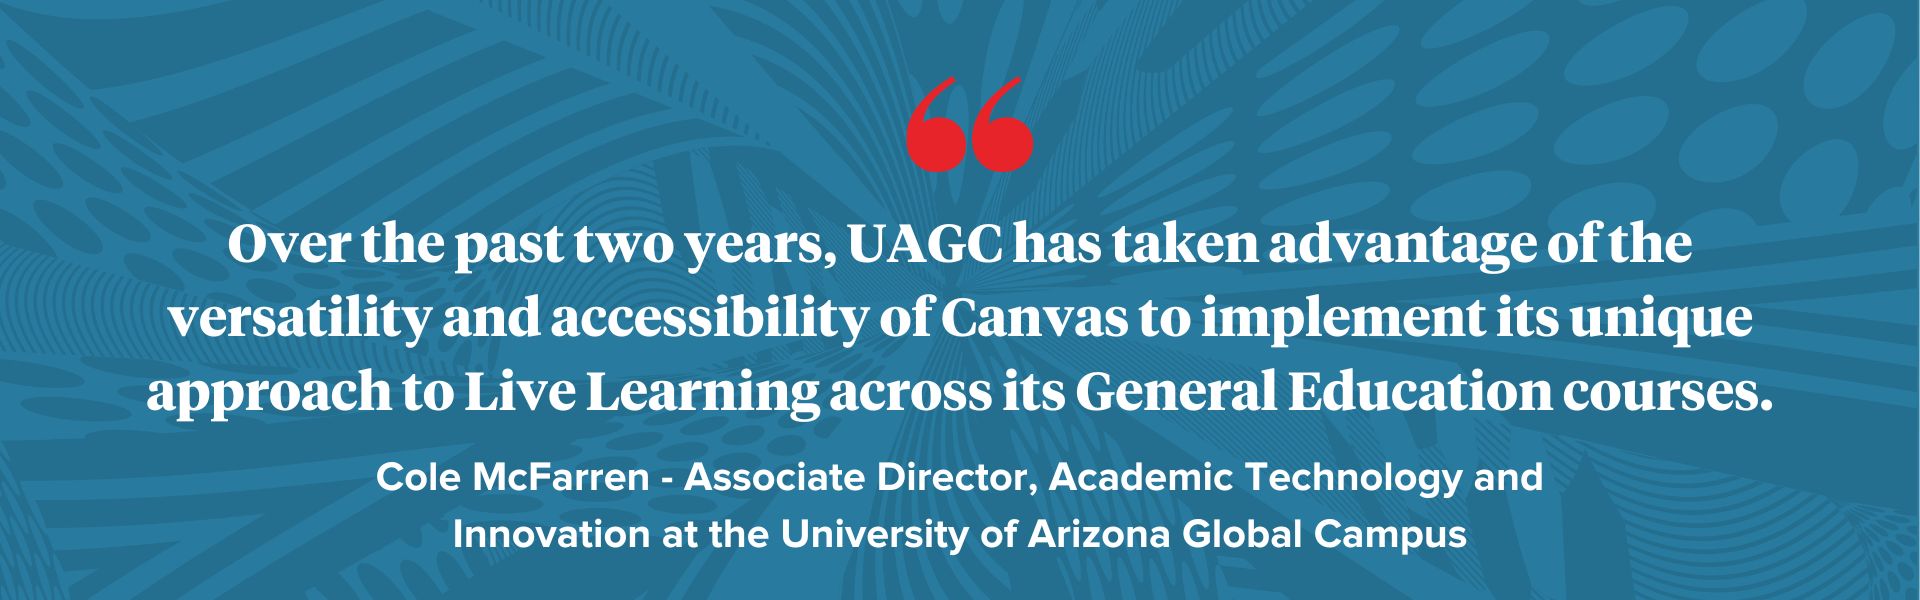 Over the past two years, UAGC has taken advantage of the versatility and accessibility of Canvas to implement its unique approach to Live Learning across its General Education courses.